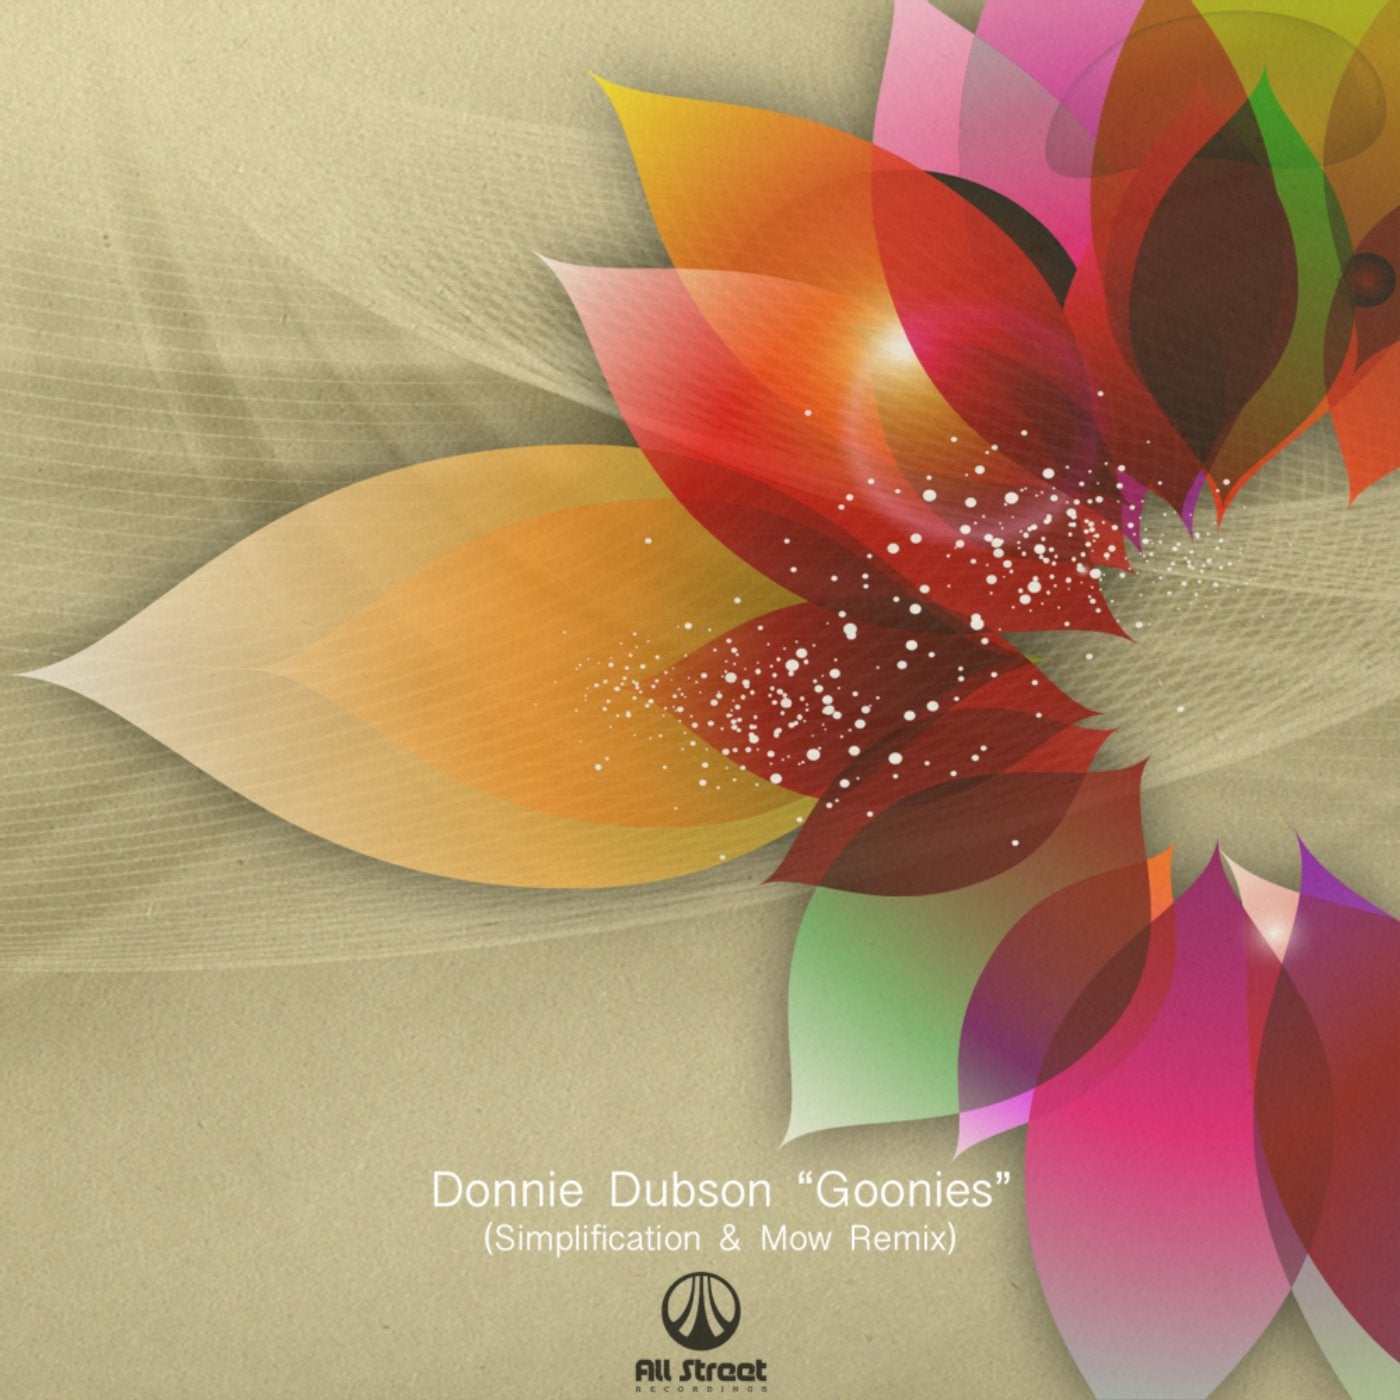 Donnie Dubson music download - Beatport